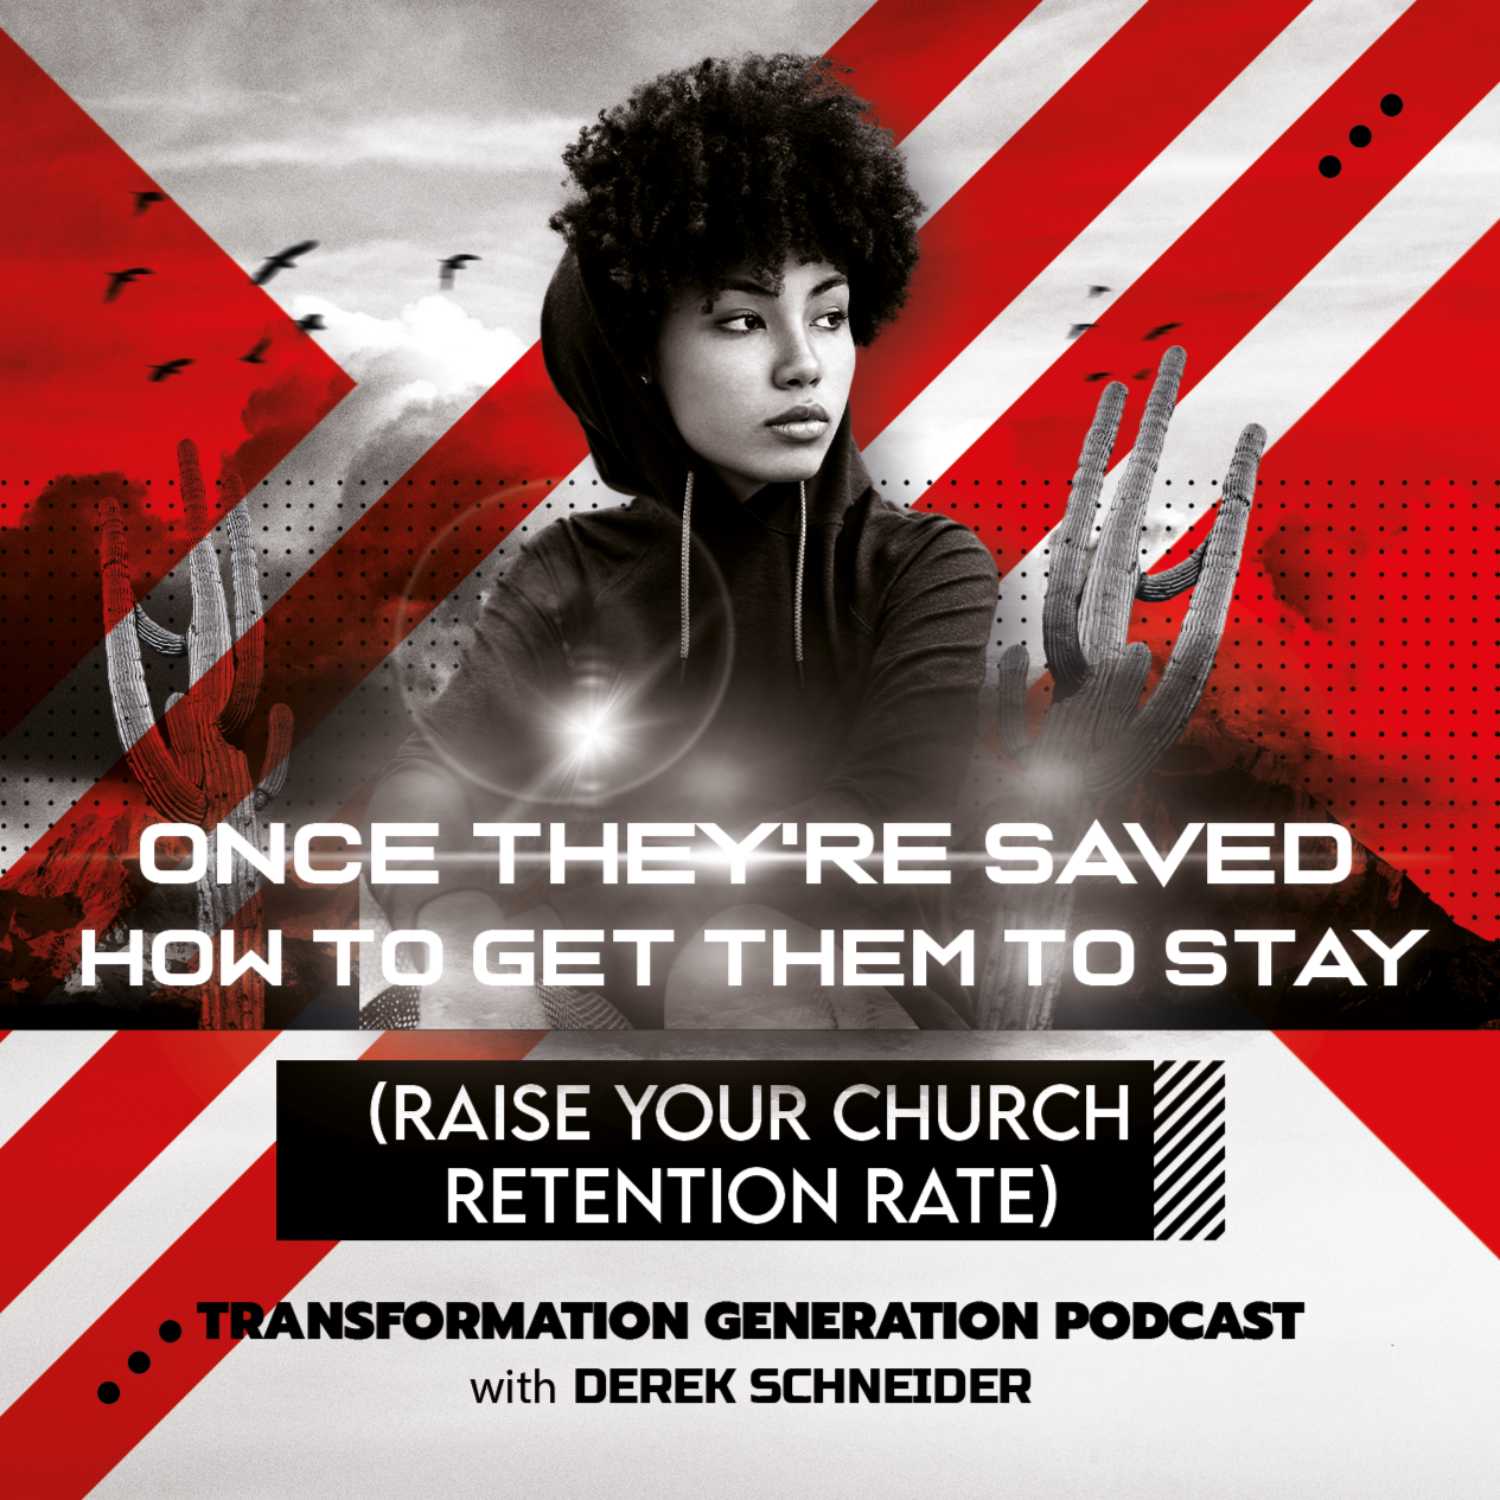 Once They’re Saved - How to Get them to Stay. (Raise Your Church Retention Rate)